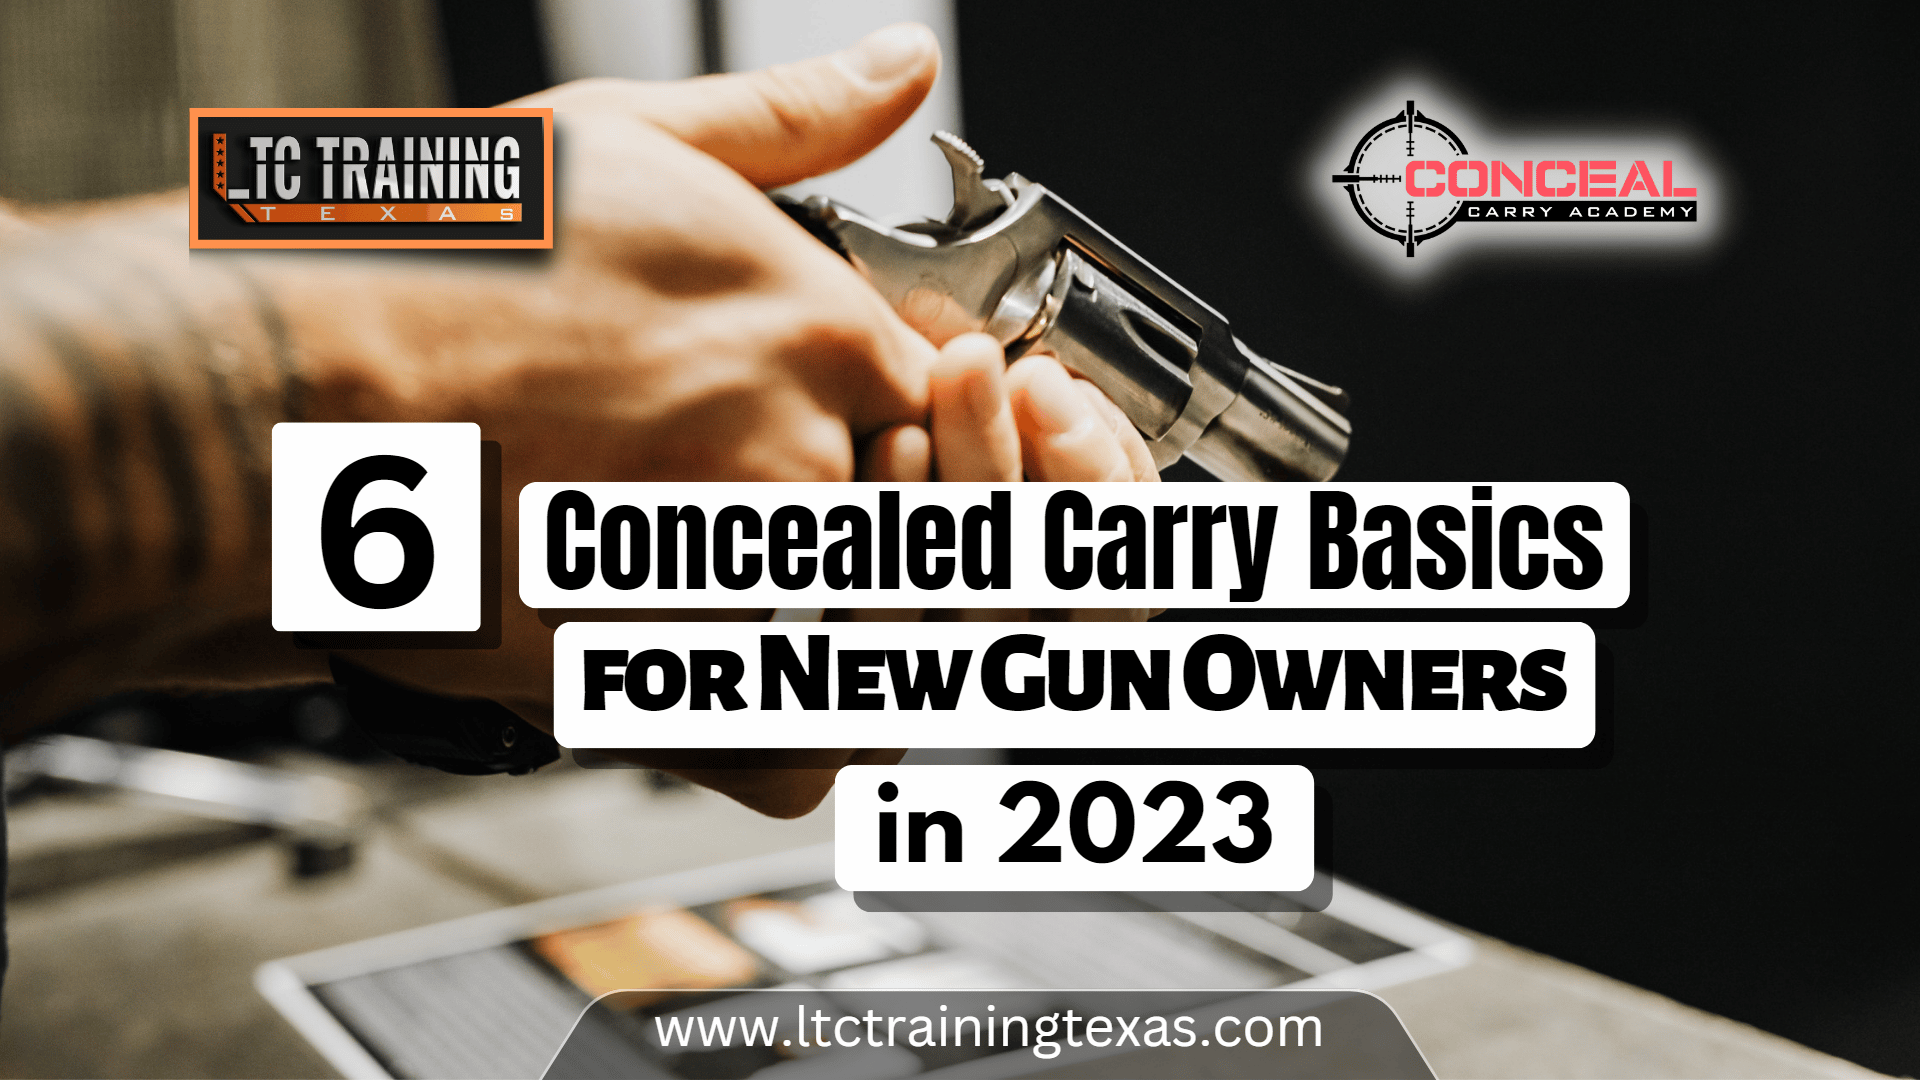 6 Concealed Carry Basics for New Gun Owners in 2023